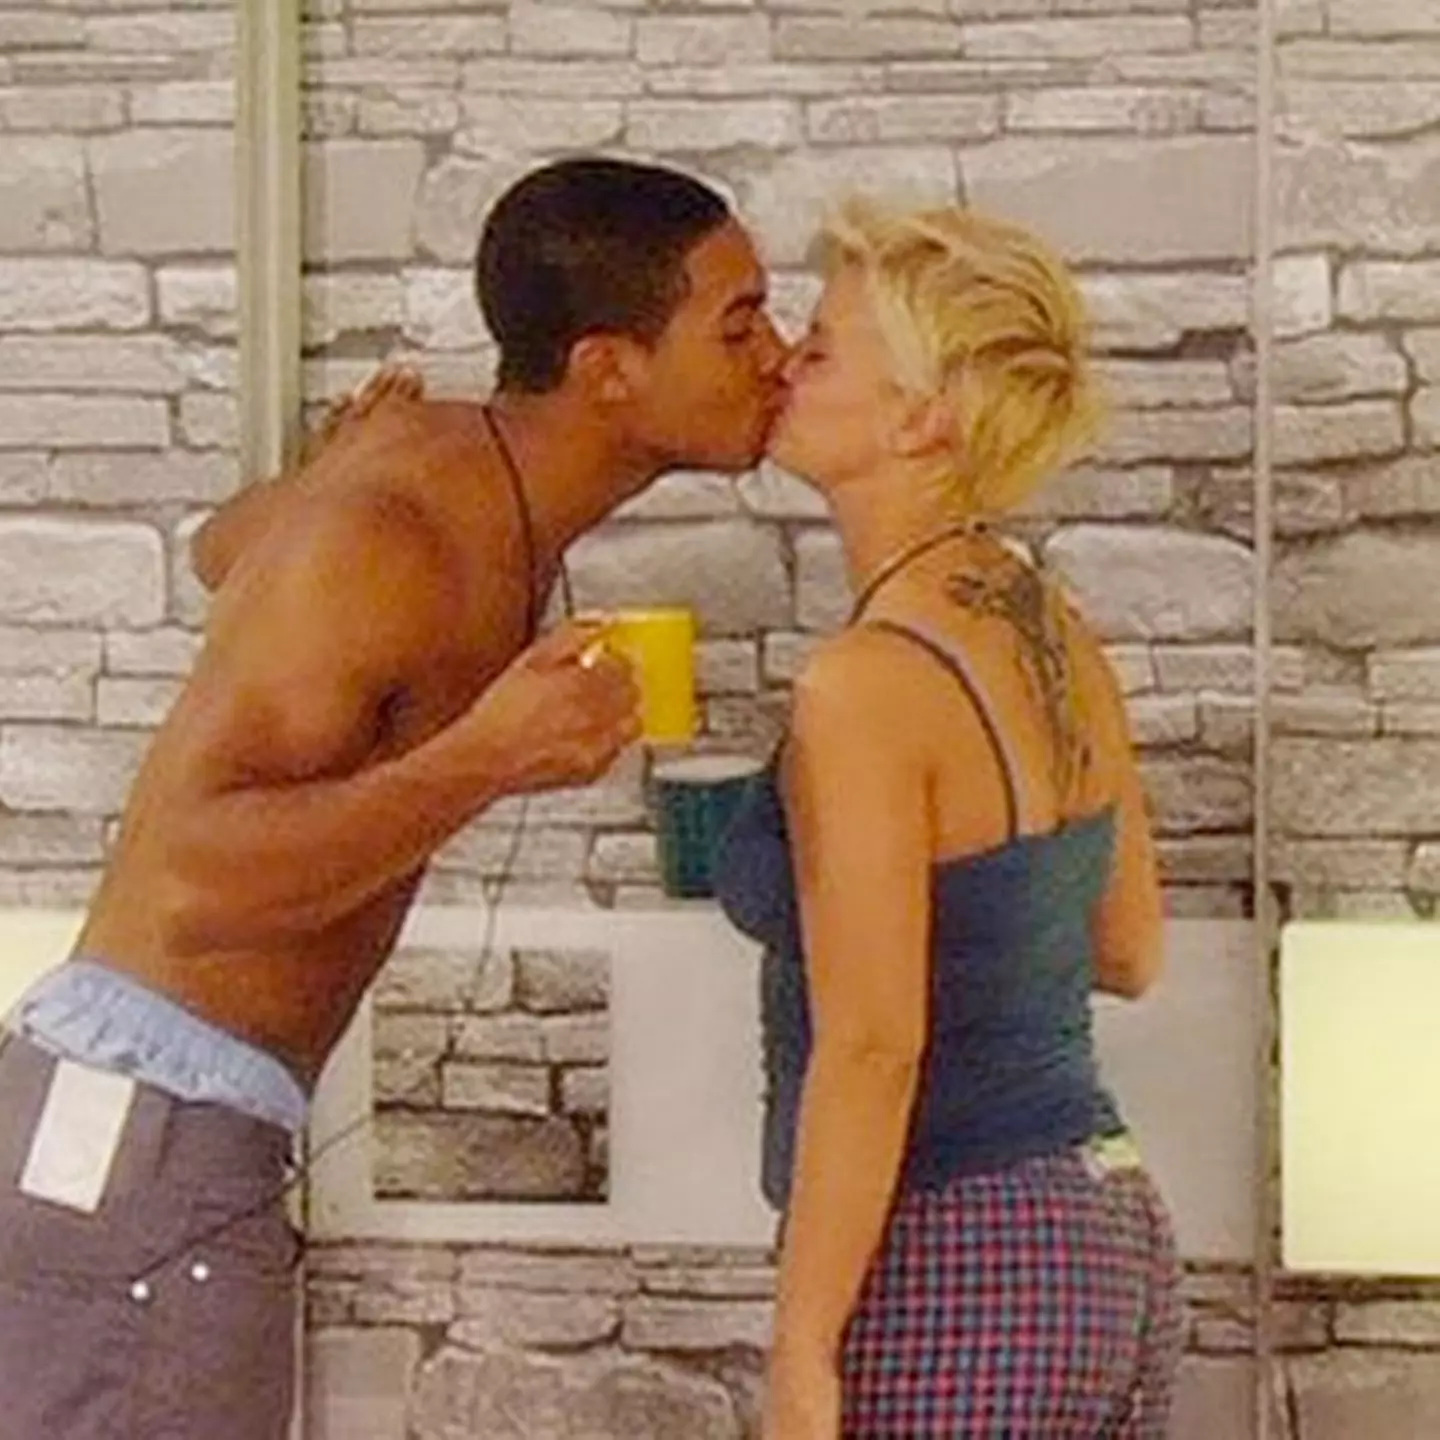 Lucien and Kerry kissed on while on the reality show together.